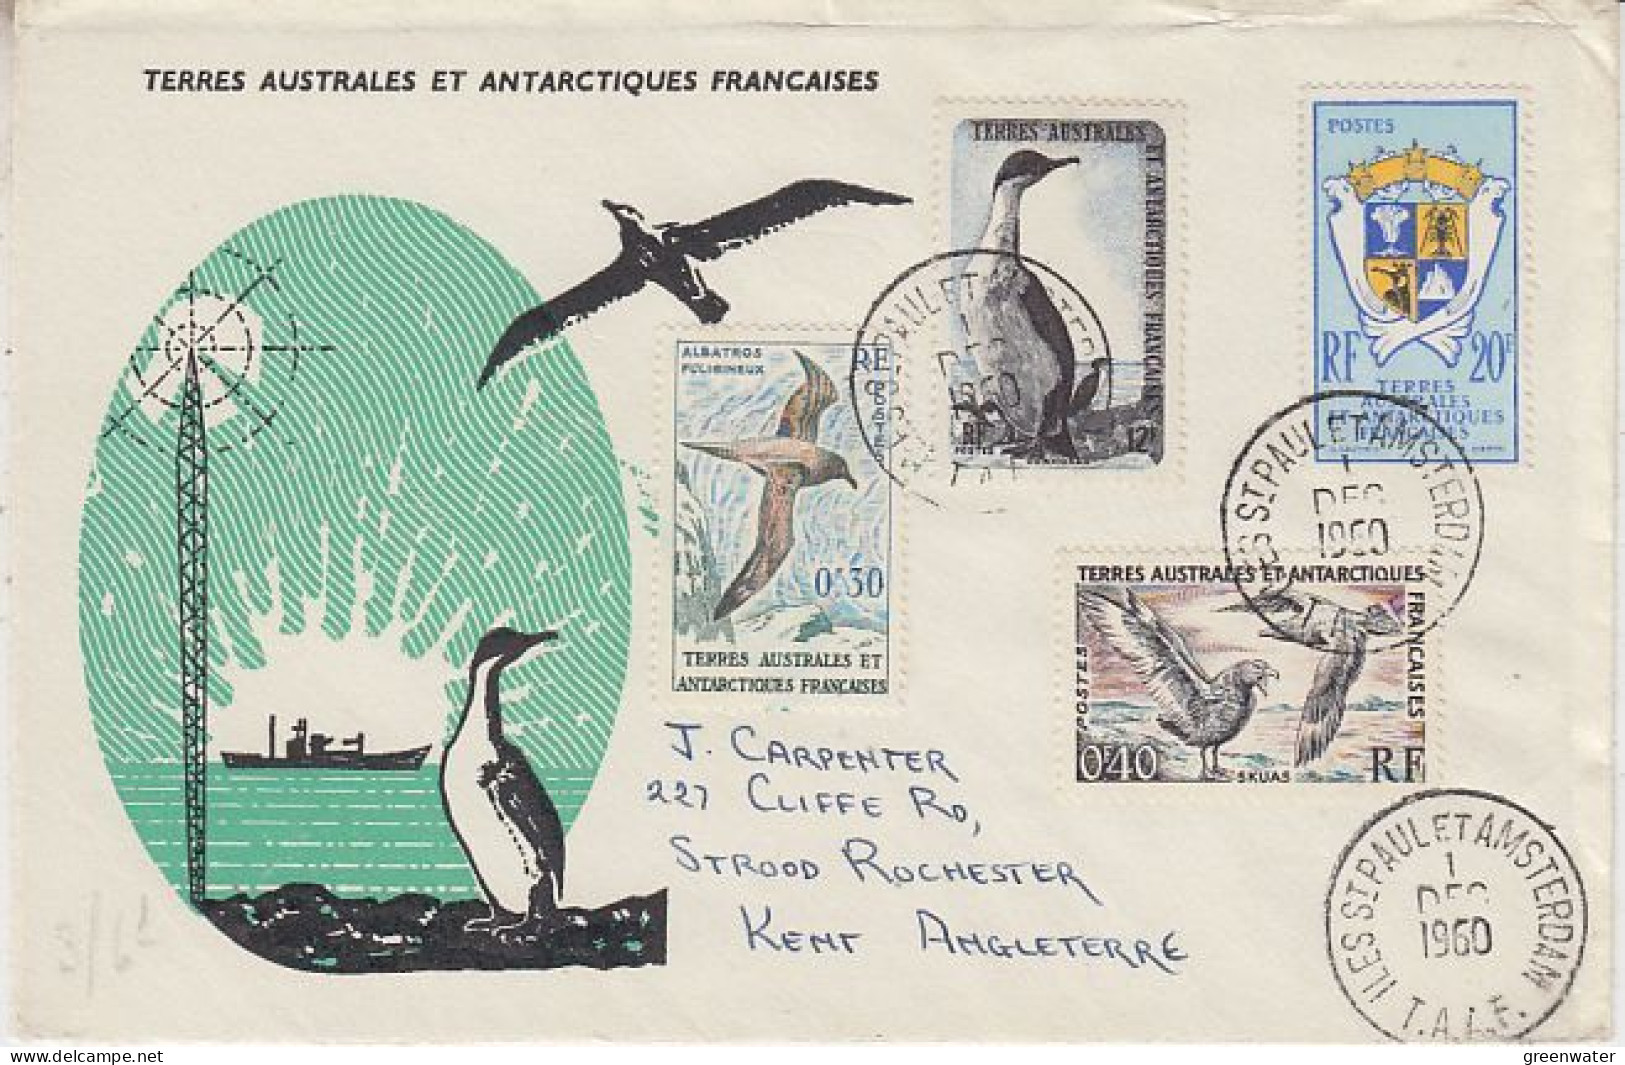 TAAF 1959 Definitives 4v On Letter Ca St. Paul Et Amsterdam 1 DEC 1960 (59850) - Covers & Documents